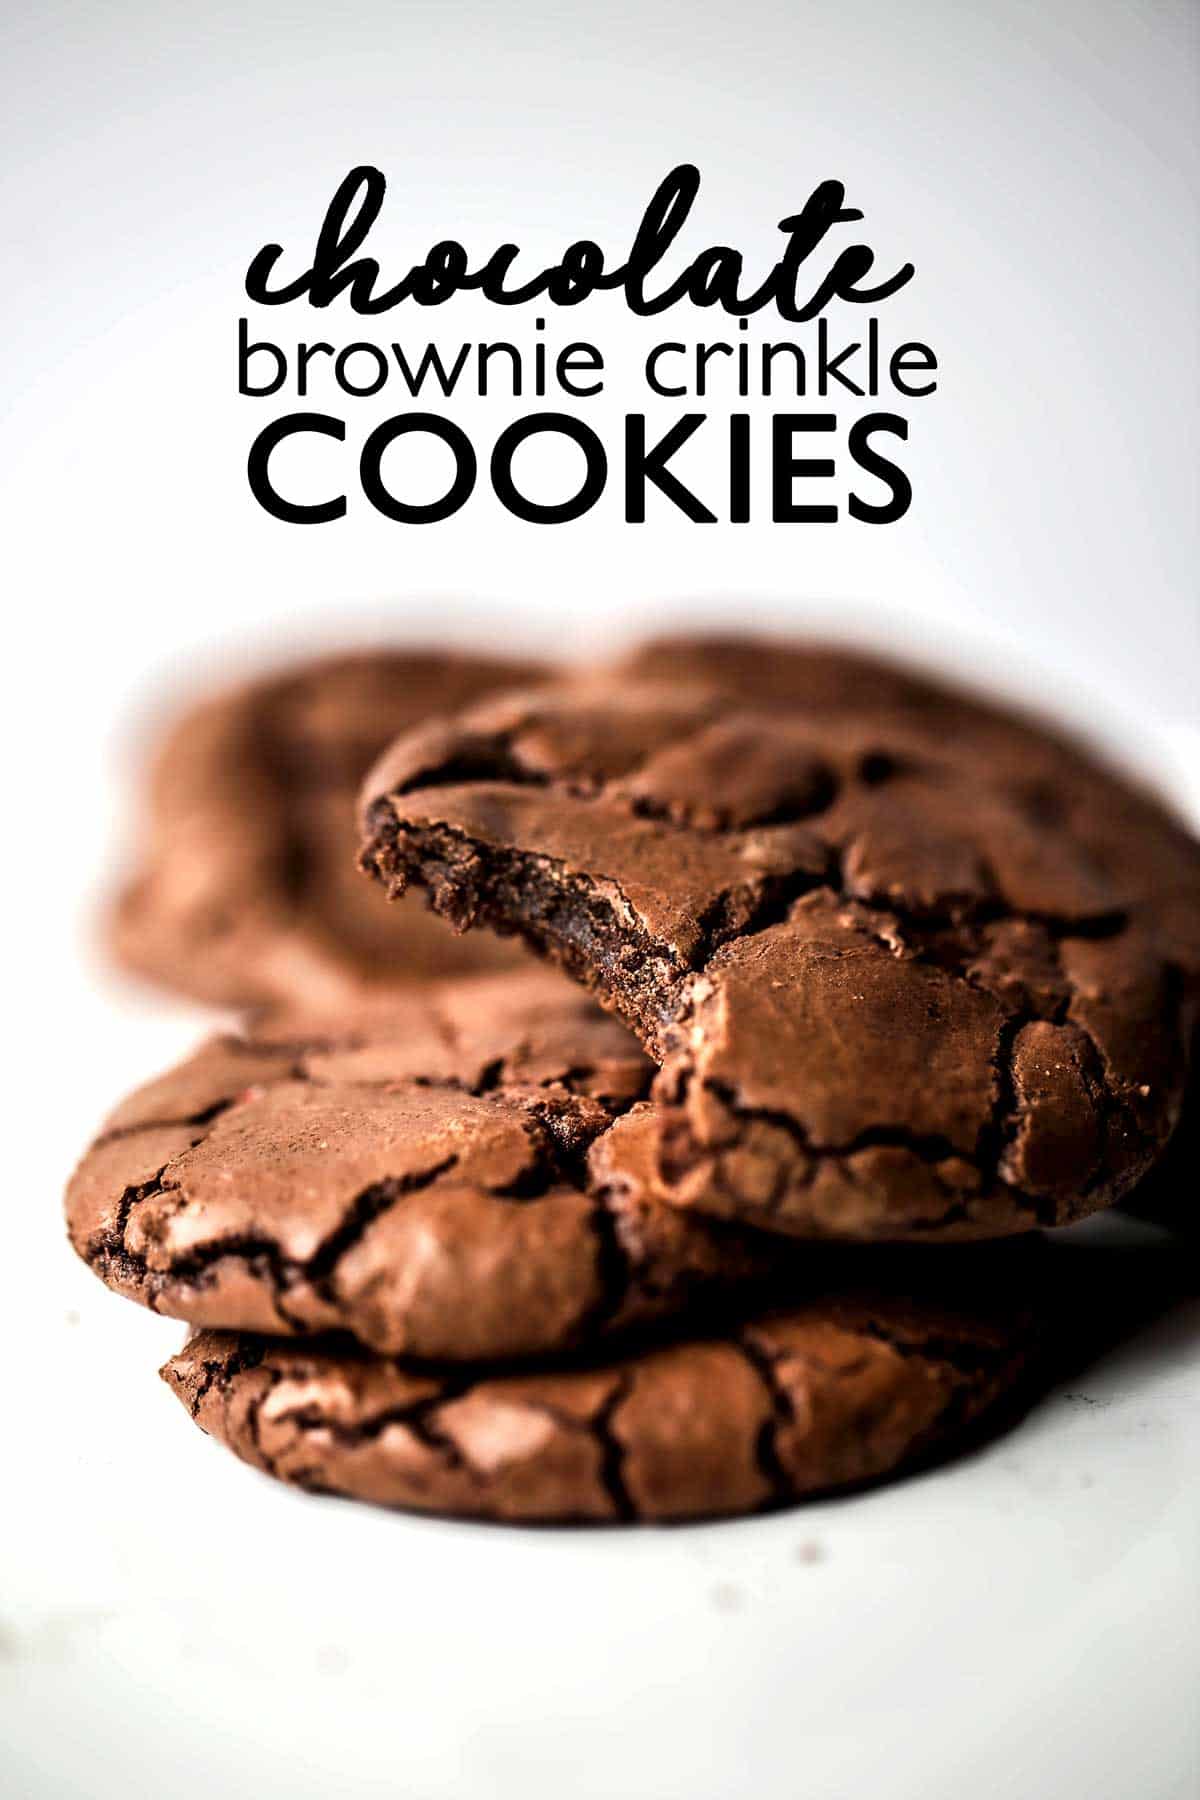 Chocolate Brownie Crinkle Cookies are a quick no chill chocolate crinkle cookies recipe with a rich fudgy interior and crisp brownie like crust with deep crinkles and crackly texture. Brownie cookies recipe | chocolate crinkle cookies